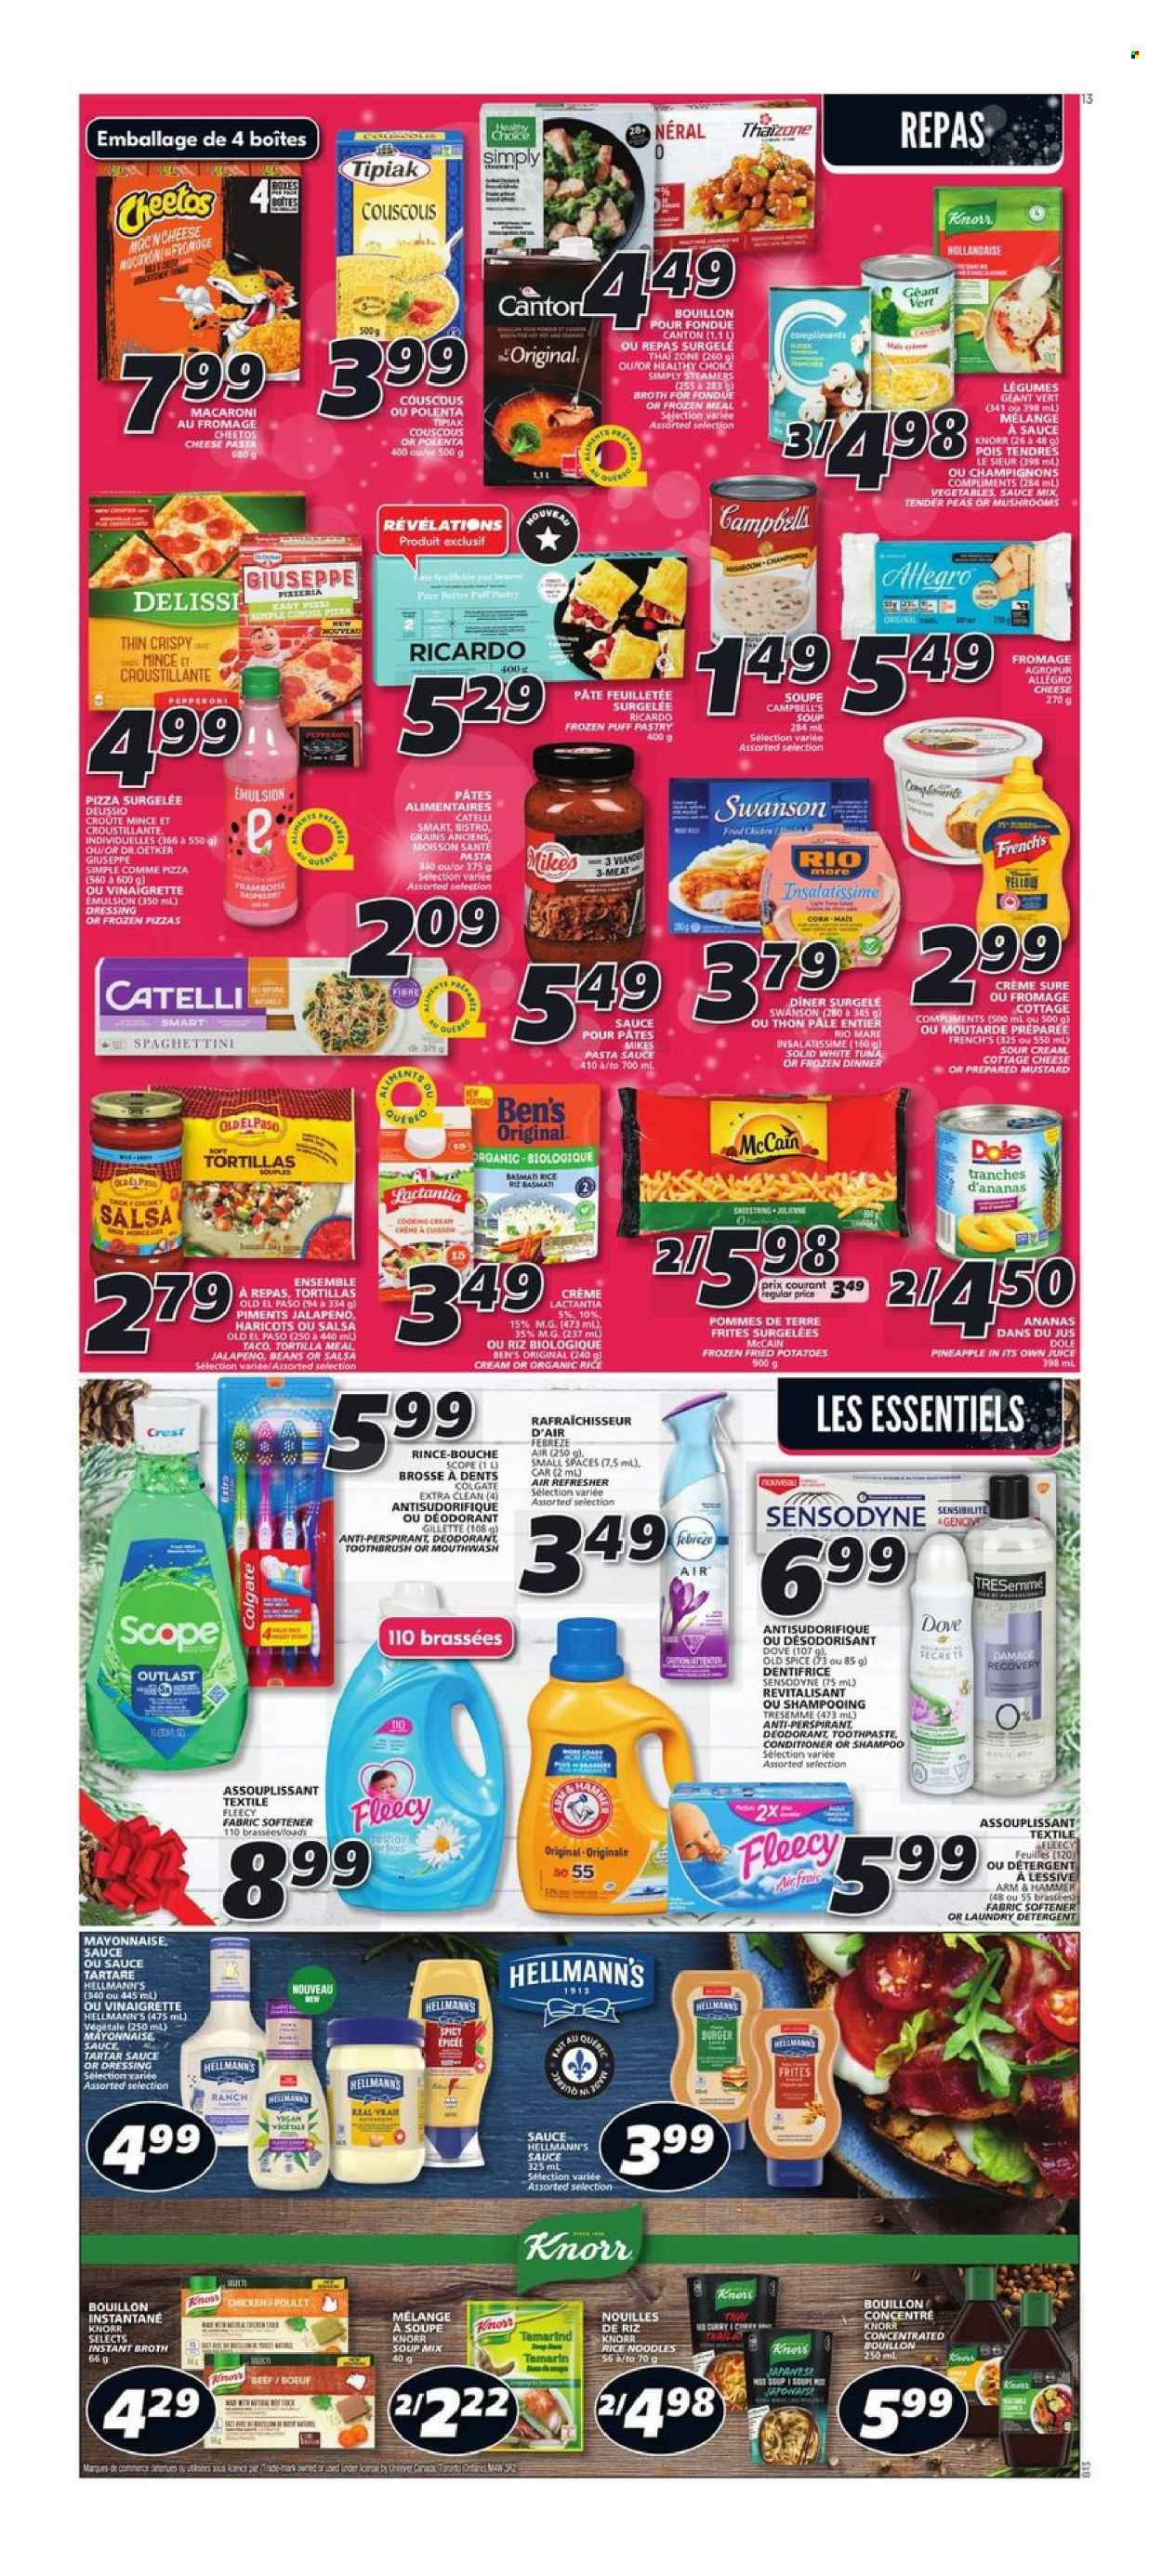 thumbnail - IGA Flyer - December 01, 2022 - December 07, 2022 - Sales products - tortillas, Old El Paso, beans, corn, potatoes, peas, Dole, jalapeño, pineapple, Campbell's, pizza, pasta sauce, soup mix, macaroni, soup, hamburger, noodles, Healthy Choice, pepperoni, cottage cheese, Dr. Oetker, sour cream, mayonnaise, tartar sauce, Hellmann’s, puff pastry, McCain, Dove, Cheetos, ARM & HAMMER, bouillon, broth, tamarind, polenta, basmati rice, rice vermicelli, spice, mustard, vinaigrette dressing, dressing, salsa, juice, IPA, couscous, Colgate, Old Spice, Sensodyne, Knorr. Page 10.